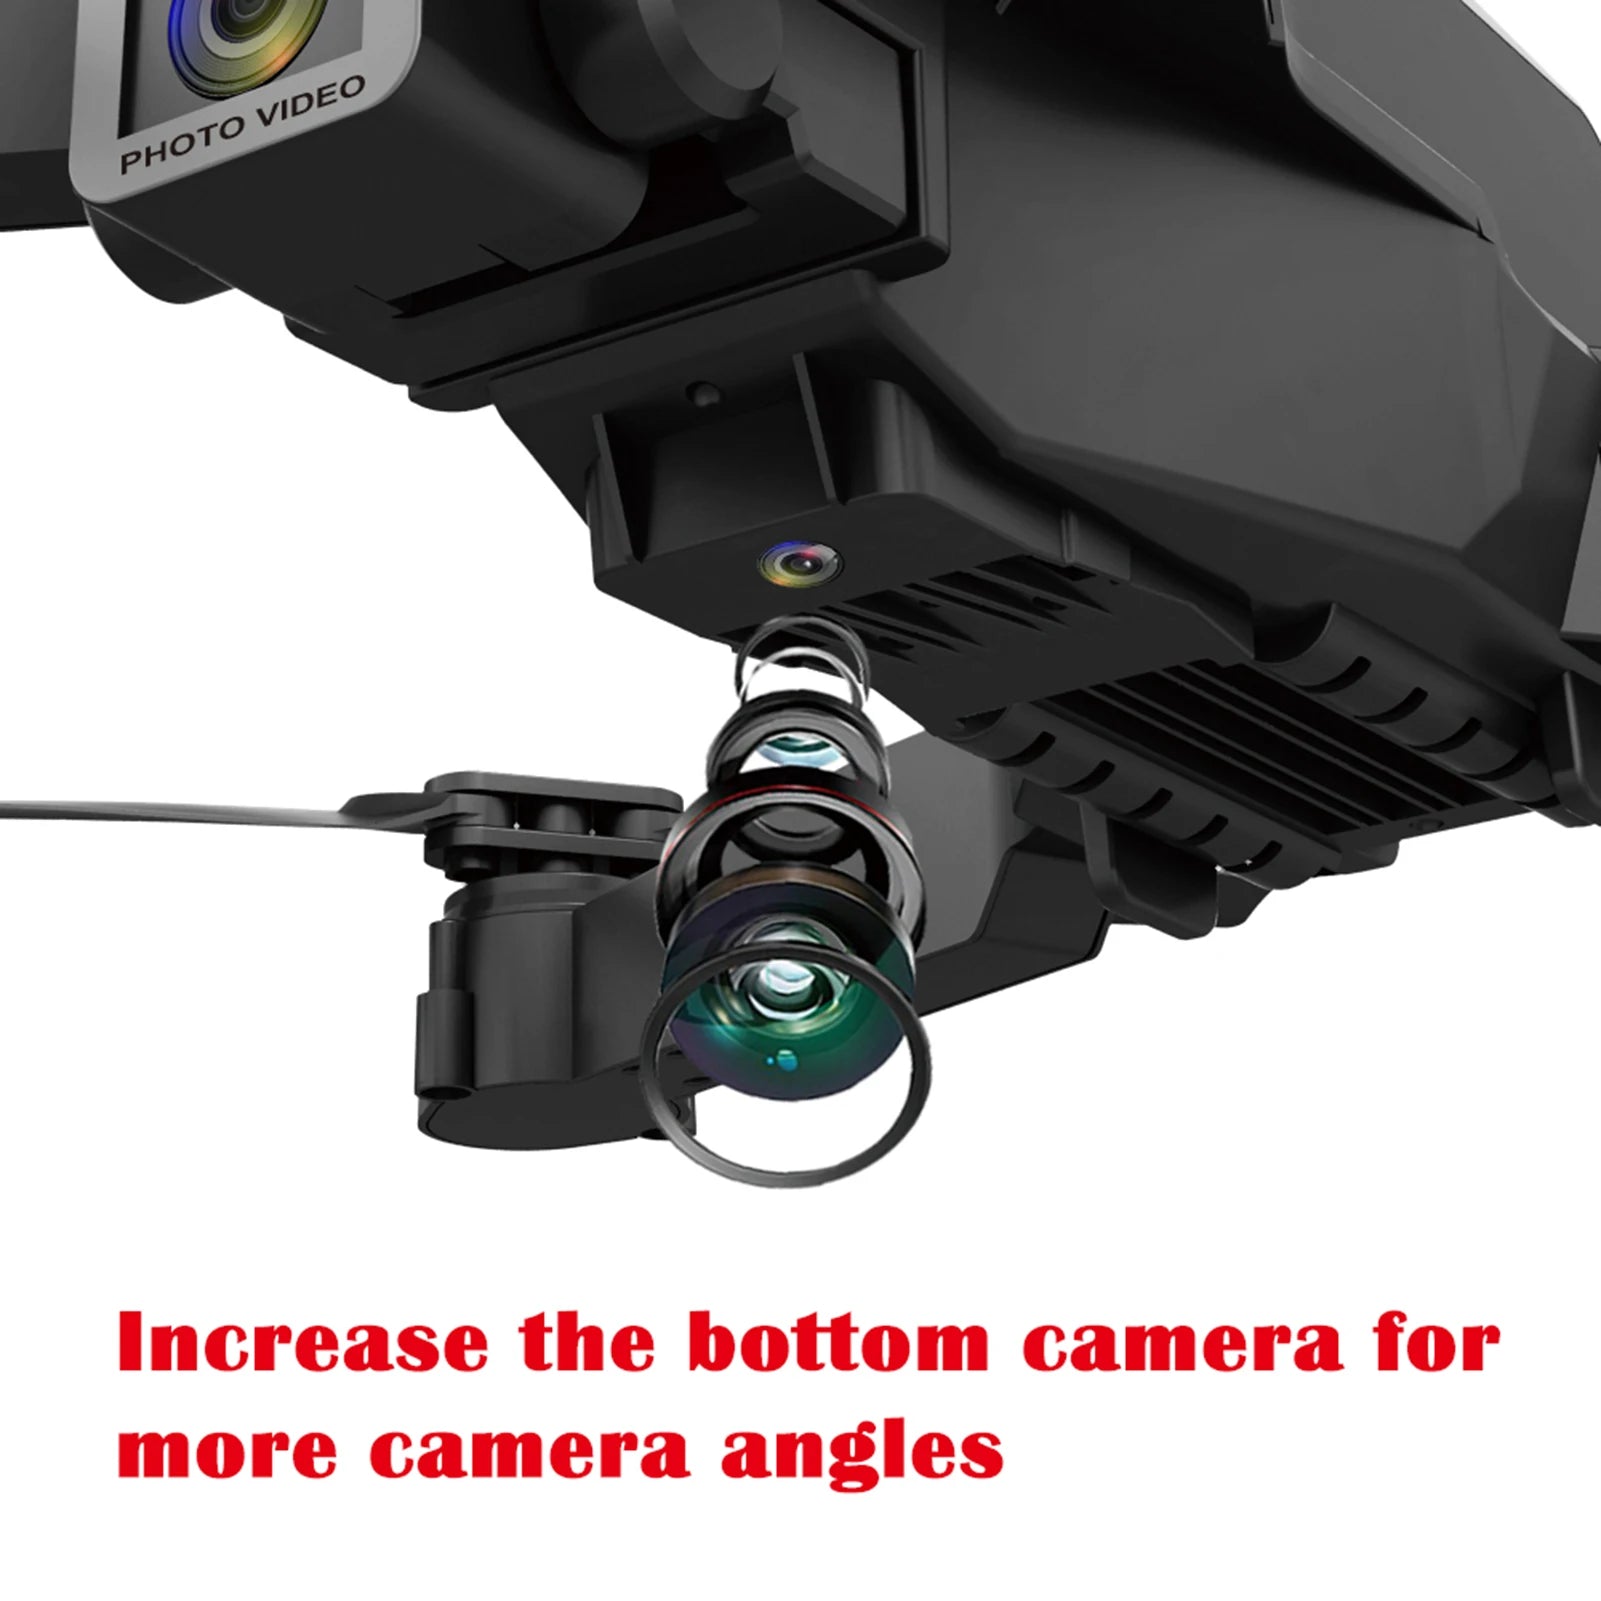 HJ95 Drone, the bottom camera for more camera angles video photo